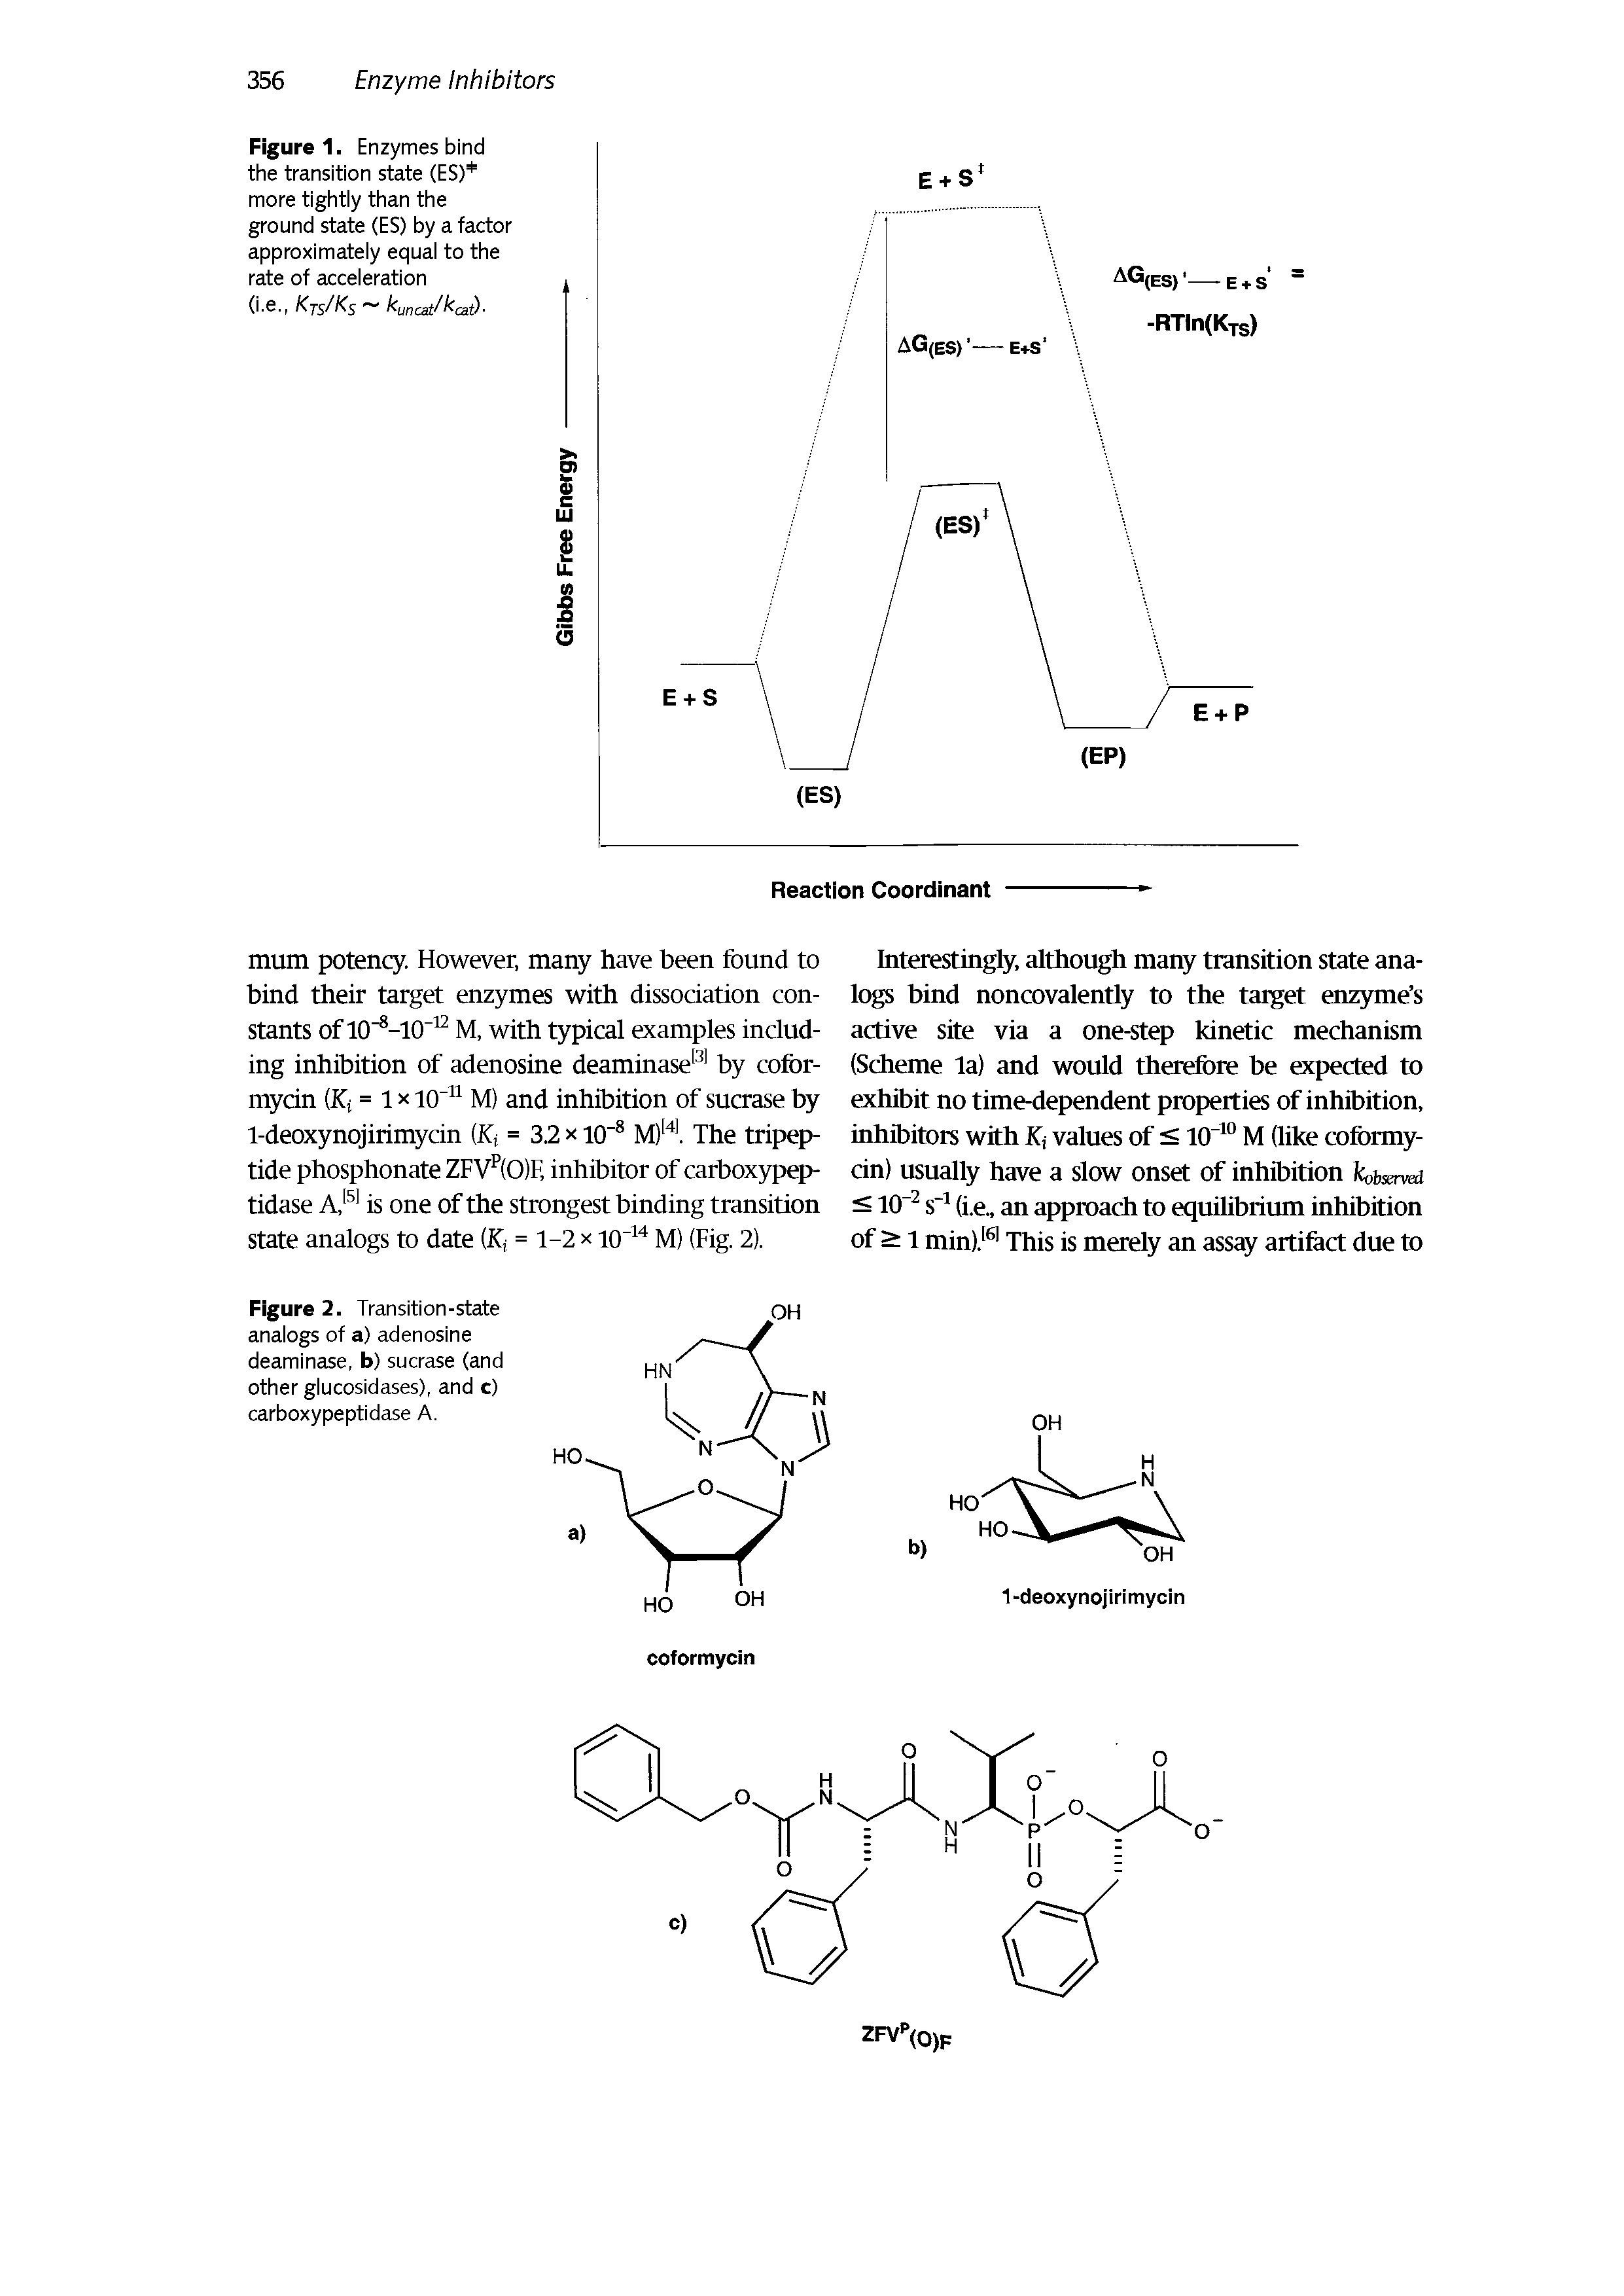 Figure 1. Enzymes bind the transition state (ES) more tightly than the ground state (ES) by a factor approximately equal to the rate of acceleration...